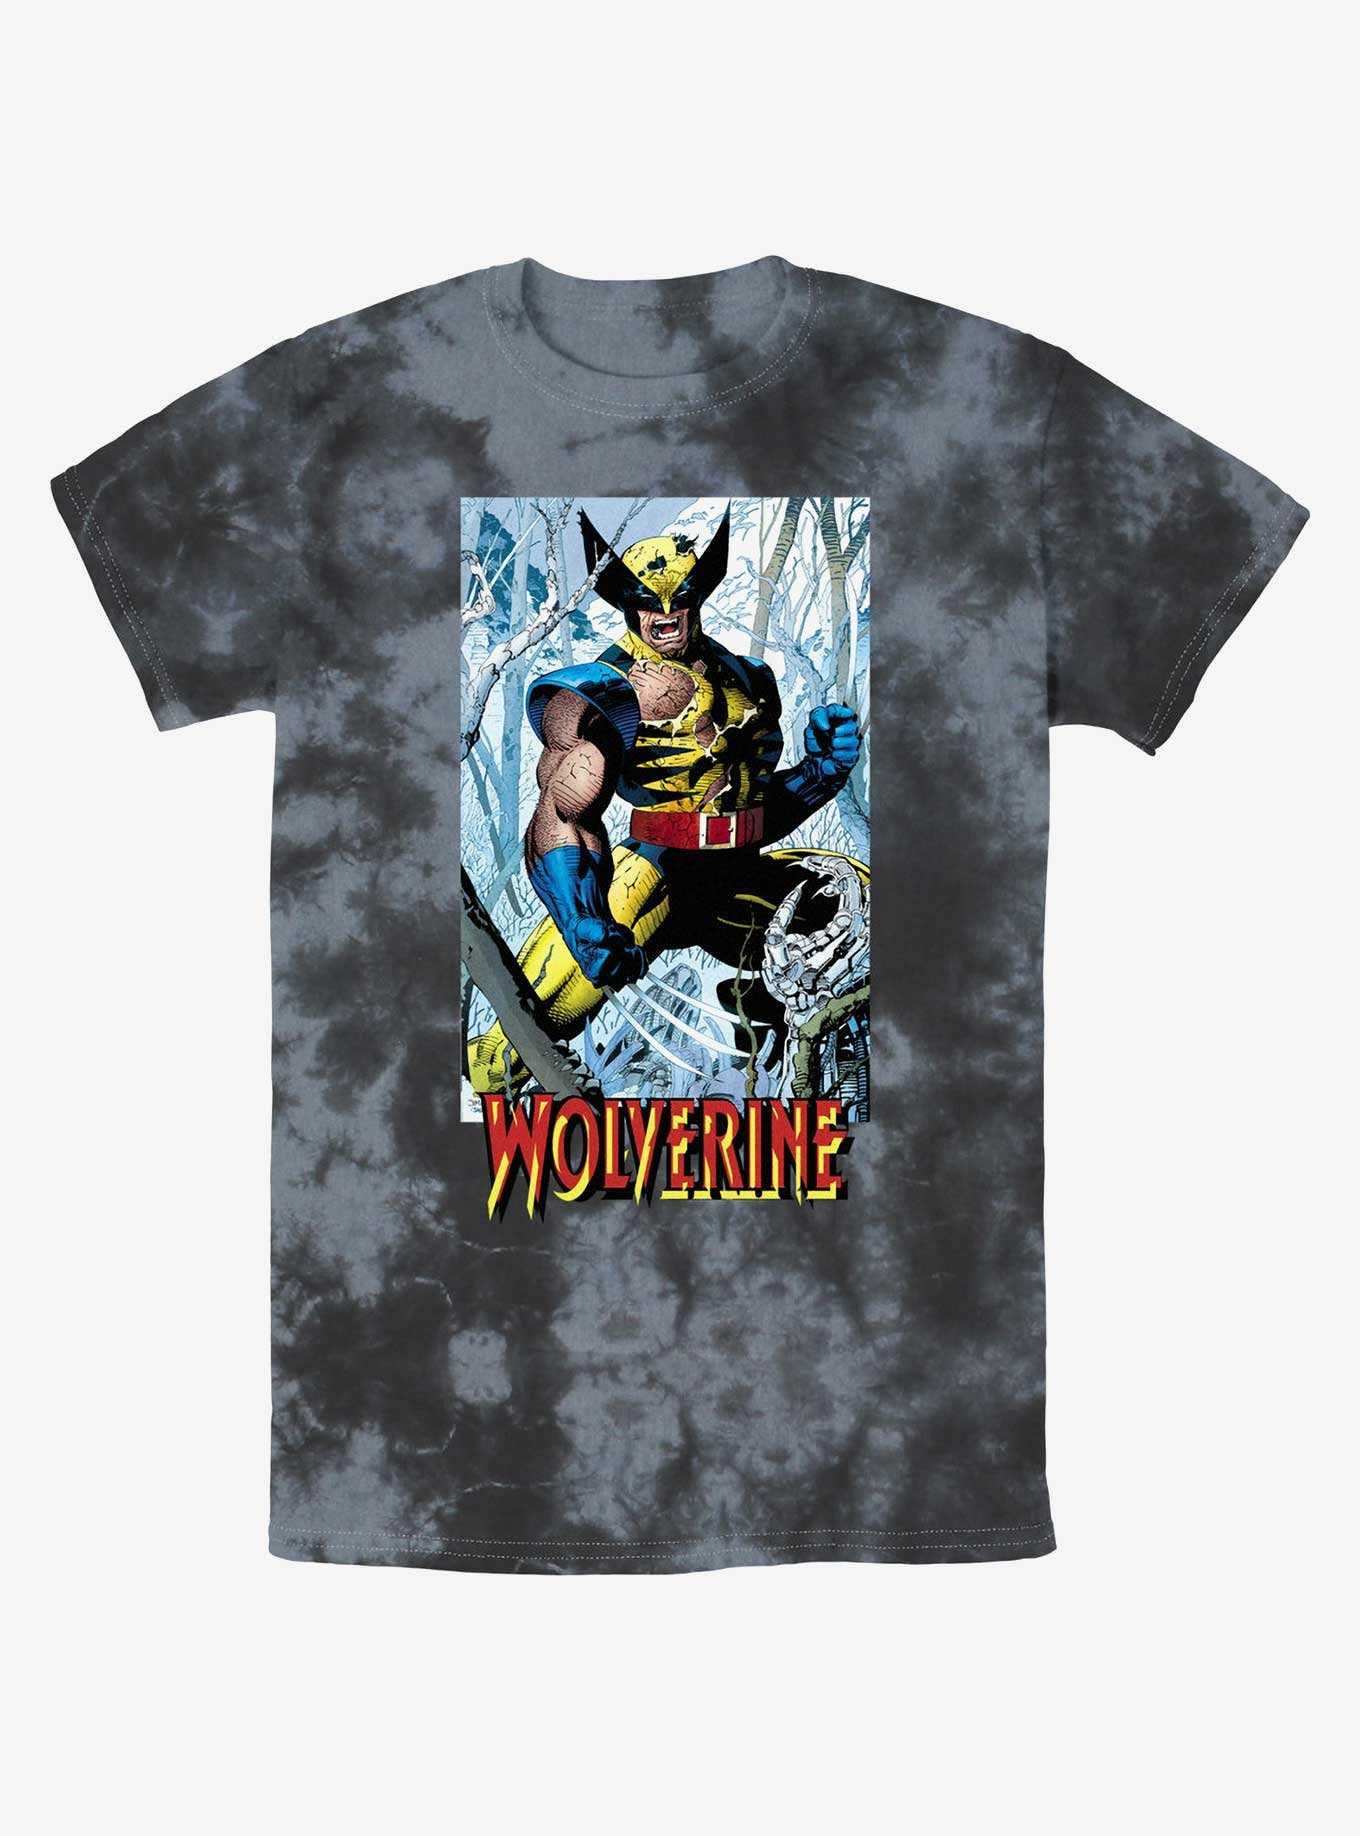 Wolverine Discipline 22 From Then Til Now Trading Card Tie-Dye T-Shirt, , hi-res